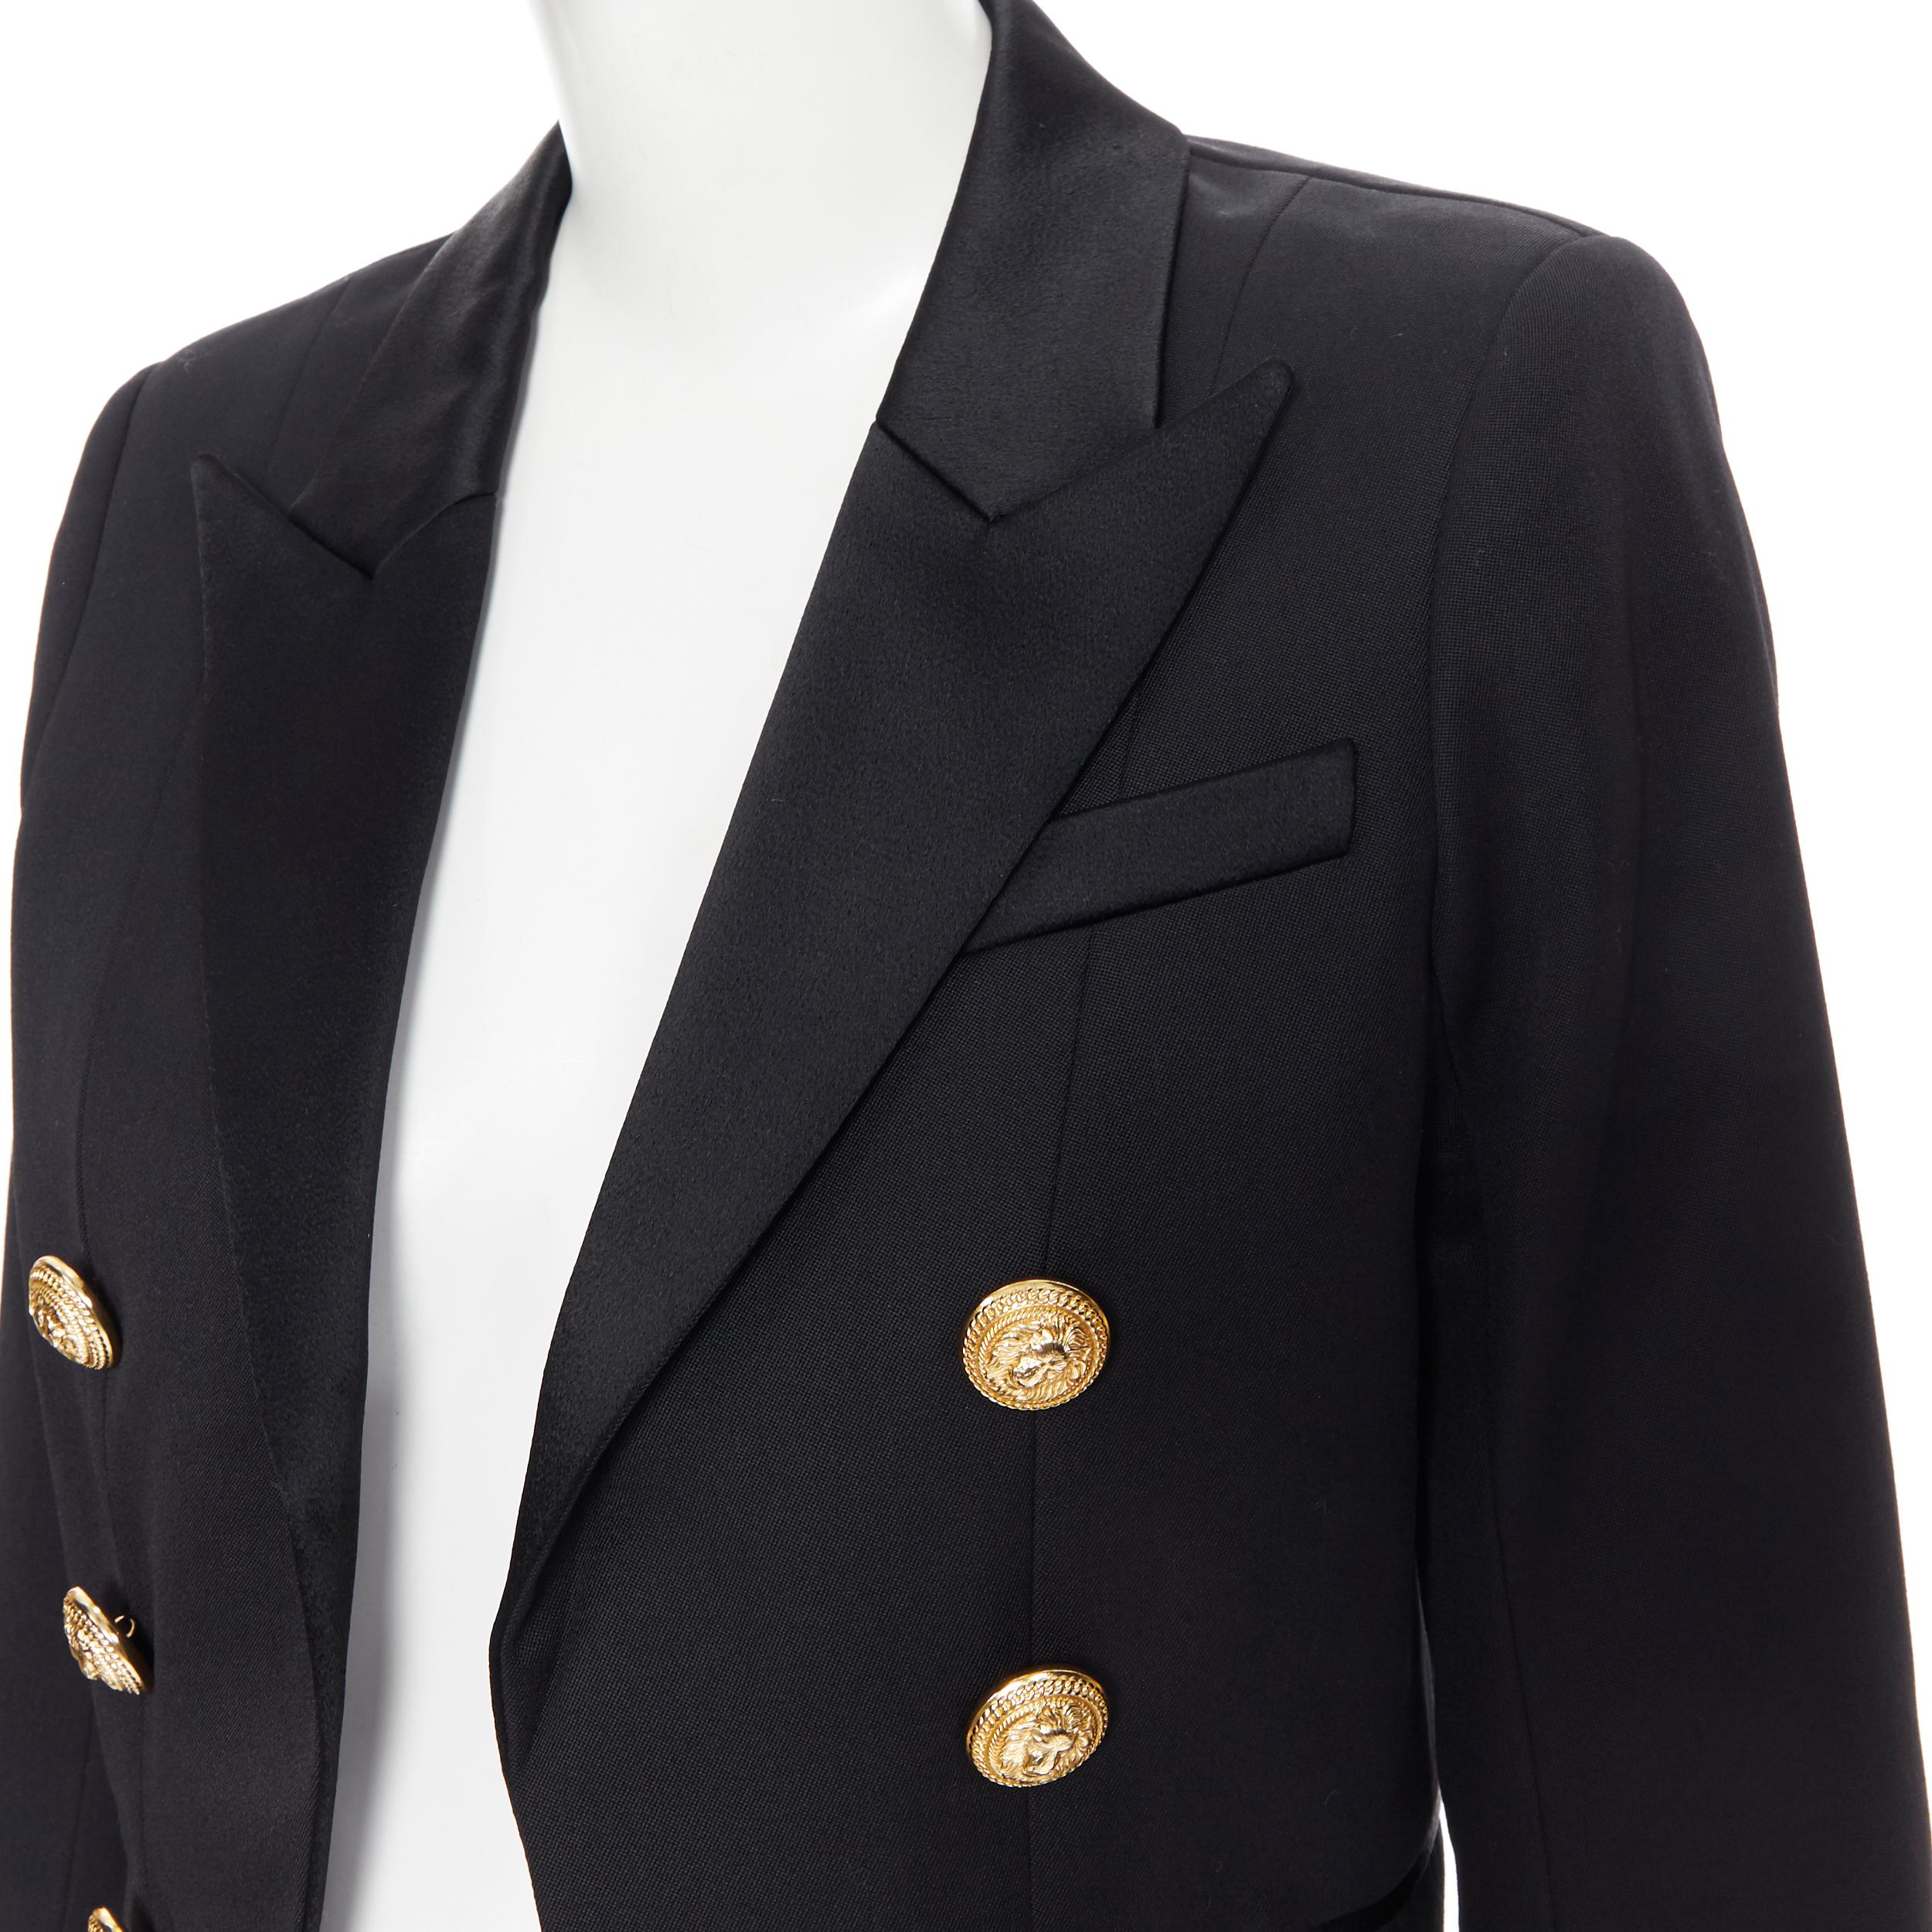 new BALMAIN black worsted wool peak lapel gold double breasted crop blazer FR38
Brand: Balmain
Designer: Olivier Rousteing
Model Name / Style: Double breasted blazer
Material: Wool
Color: Black
Pattern: Solid
Closure: Button
Extra Detail: Padded